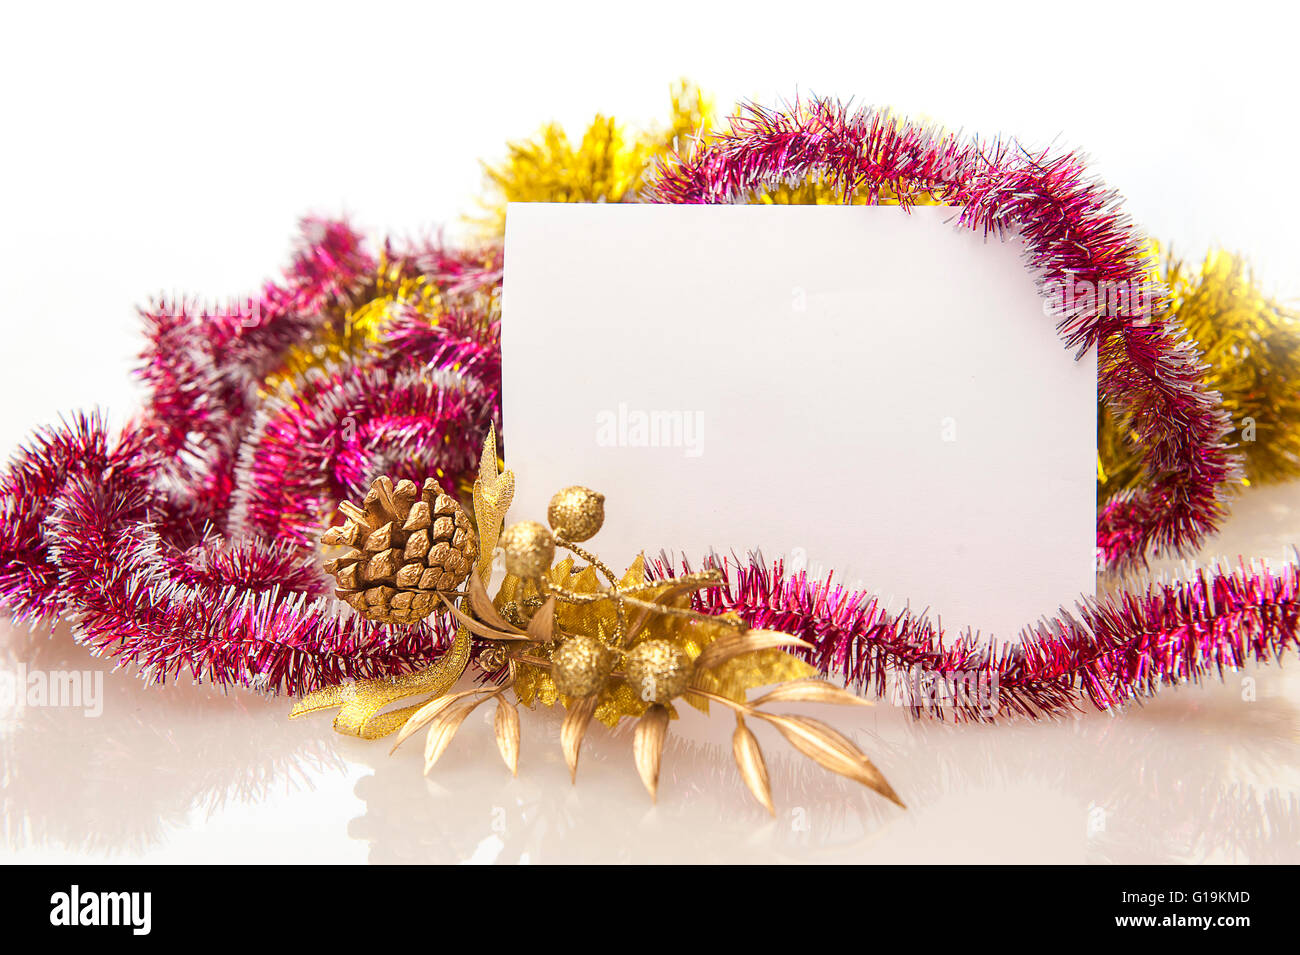 Christmas background frame, place for your text Stock Photo